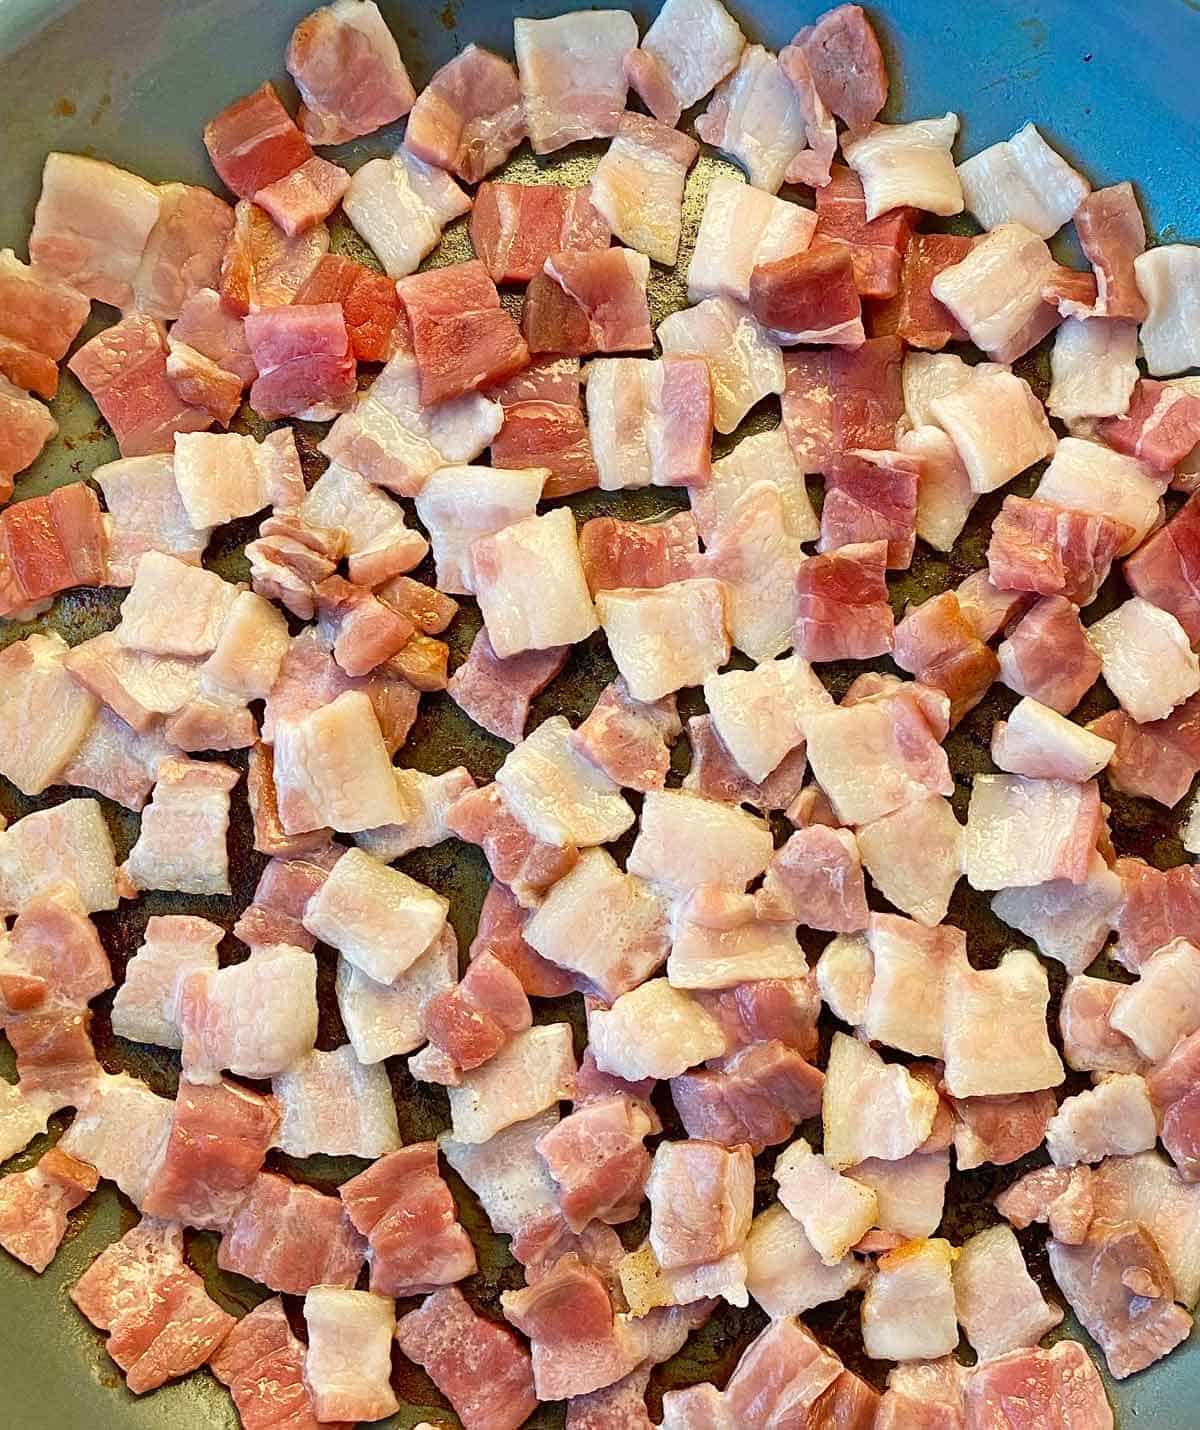 Uncooked chopped bacon squares ready to cook in a nonstick skillet.